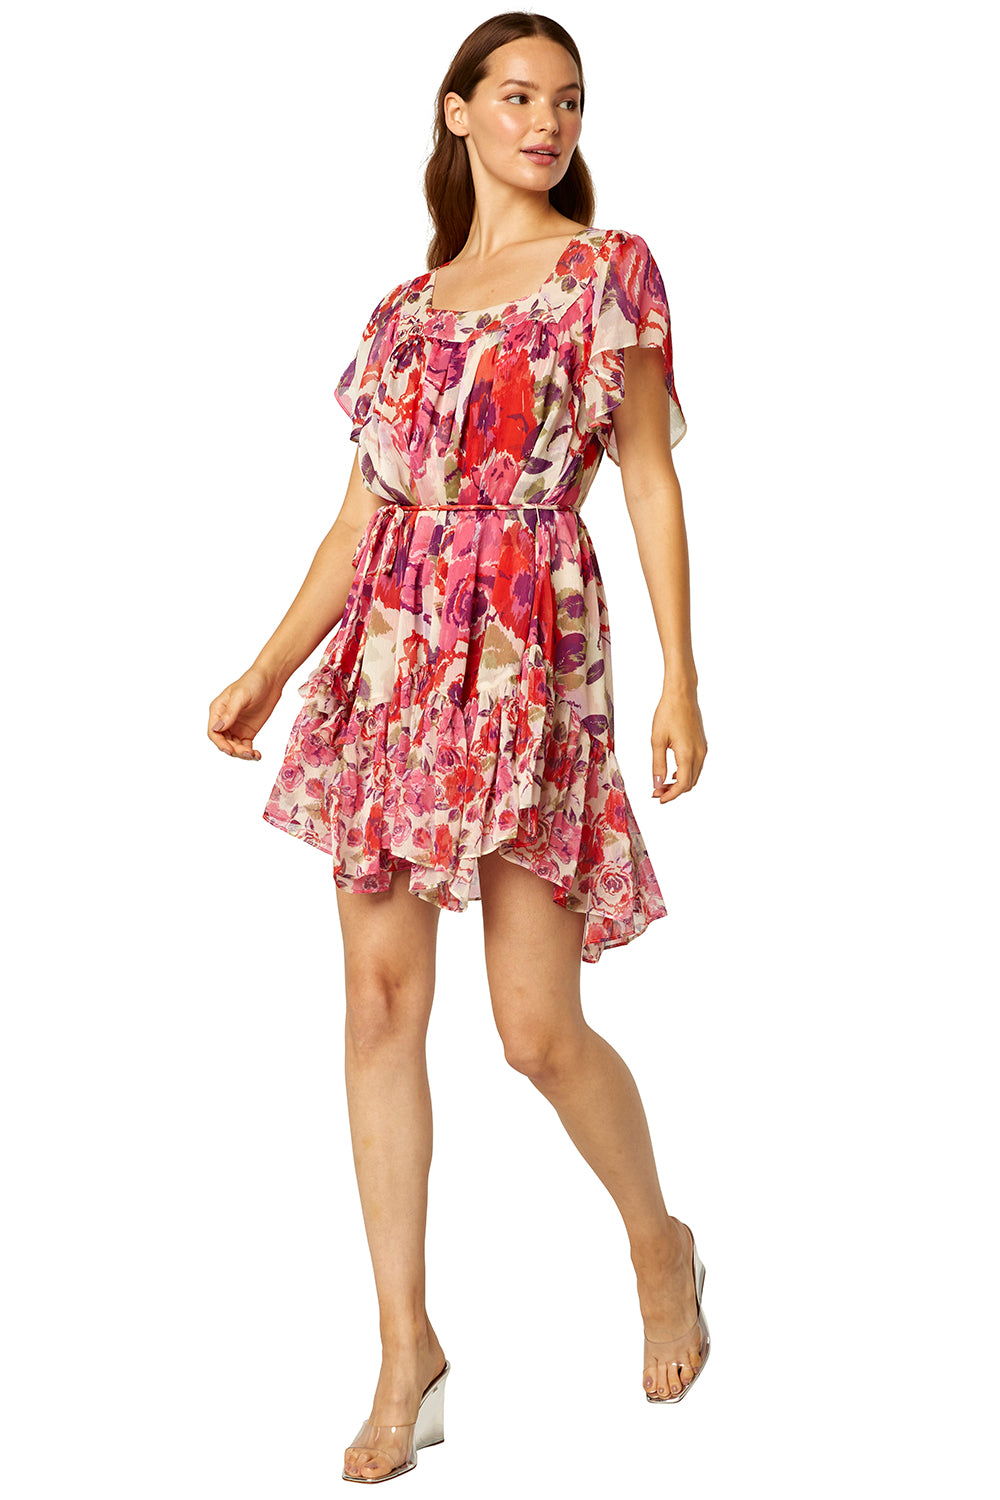 Misa - Kasey Dress in Coming Up Roses Mix